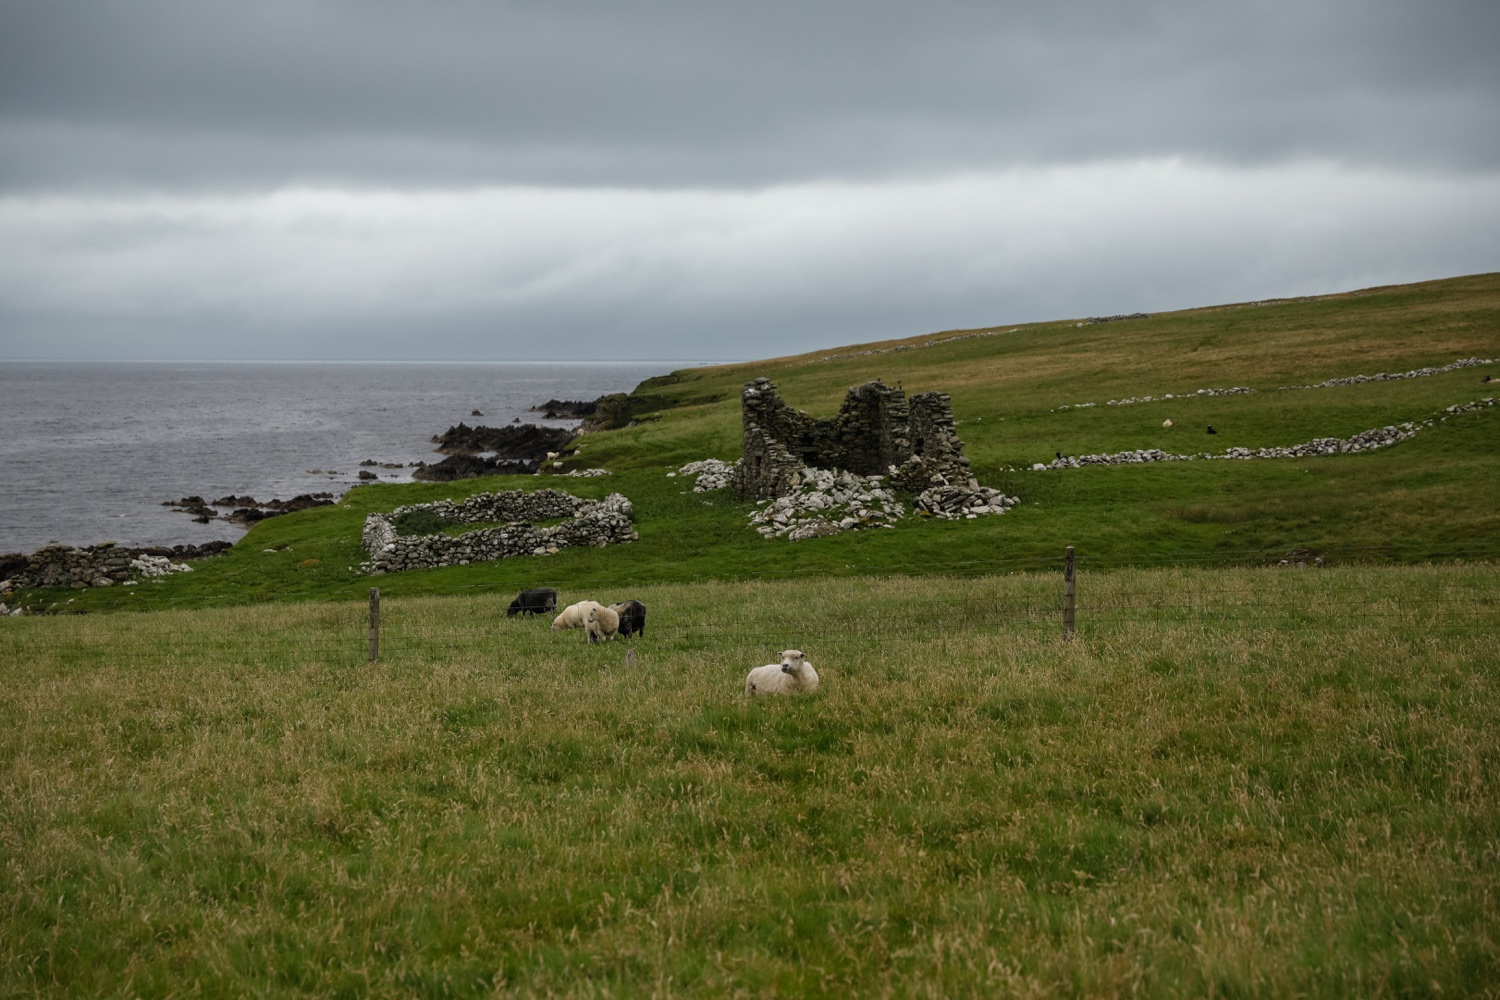 Image of sheep in shetland - if you have ever wonder what Shetland is like